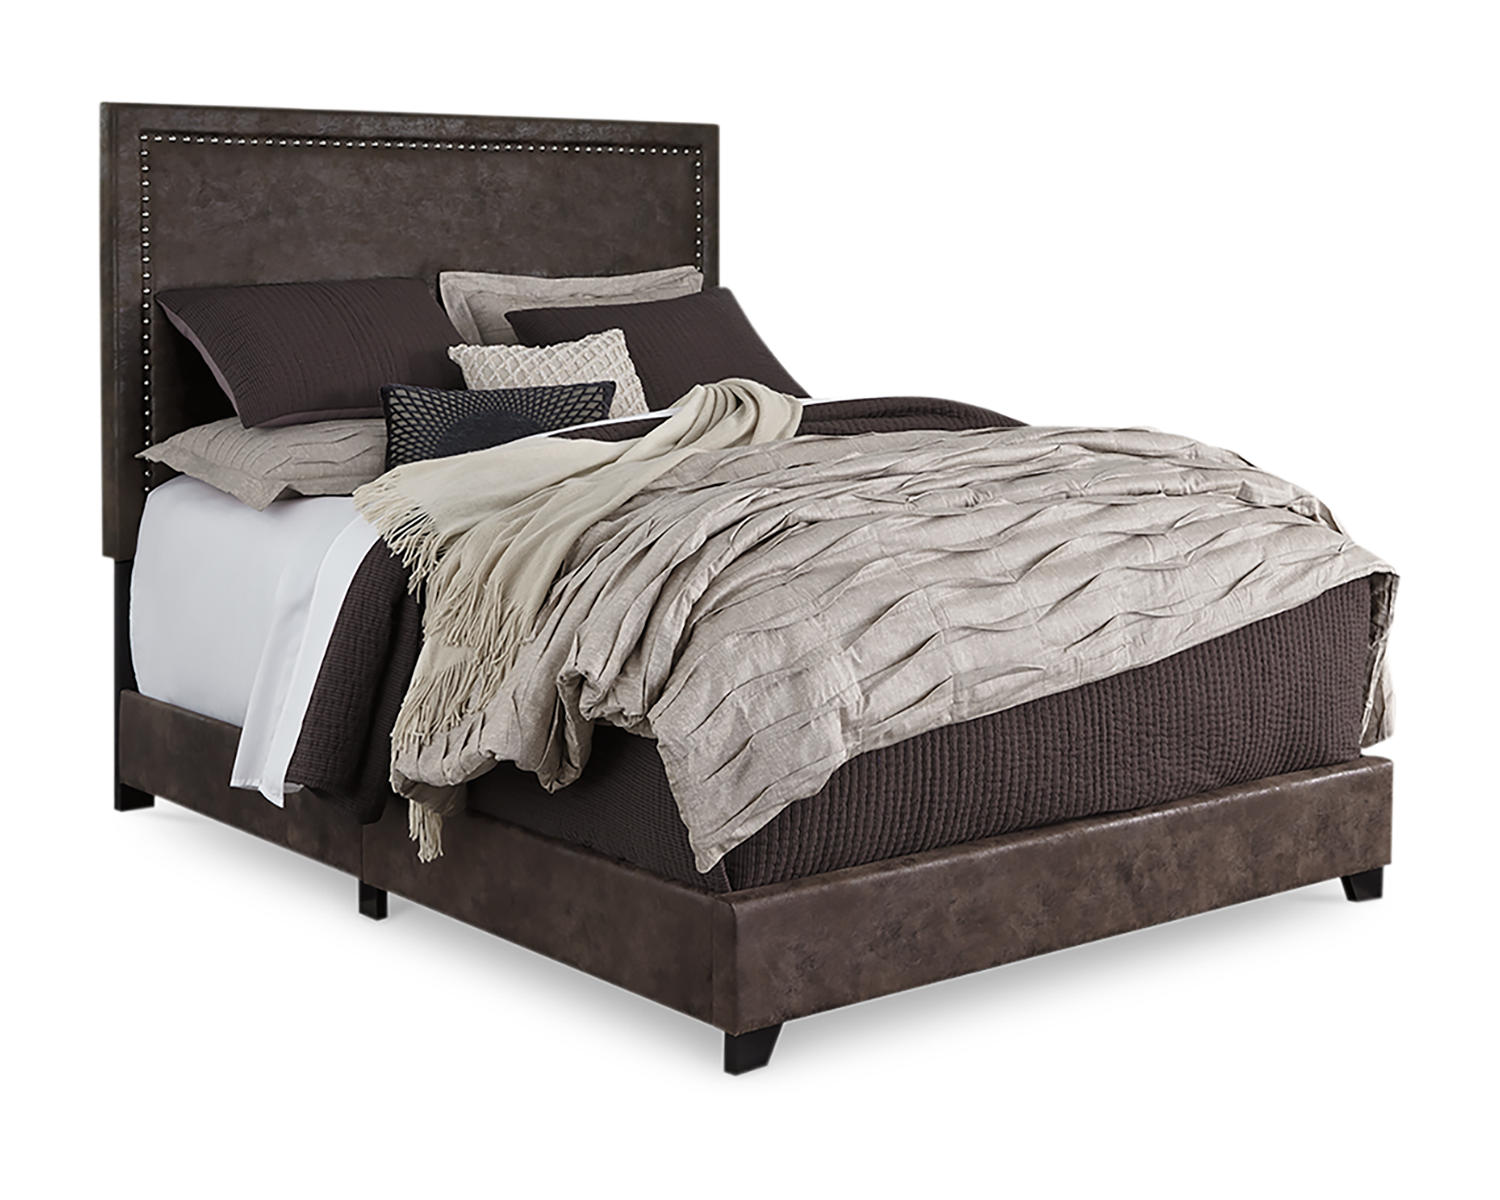 Signature Design by Ashley Dolante Contemporary Faux Leather Upholstered Platform Bed, Queen, Brown - image 1 of 8